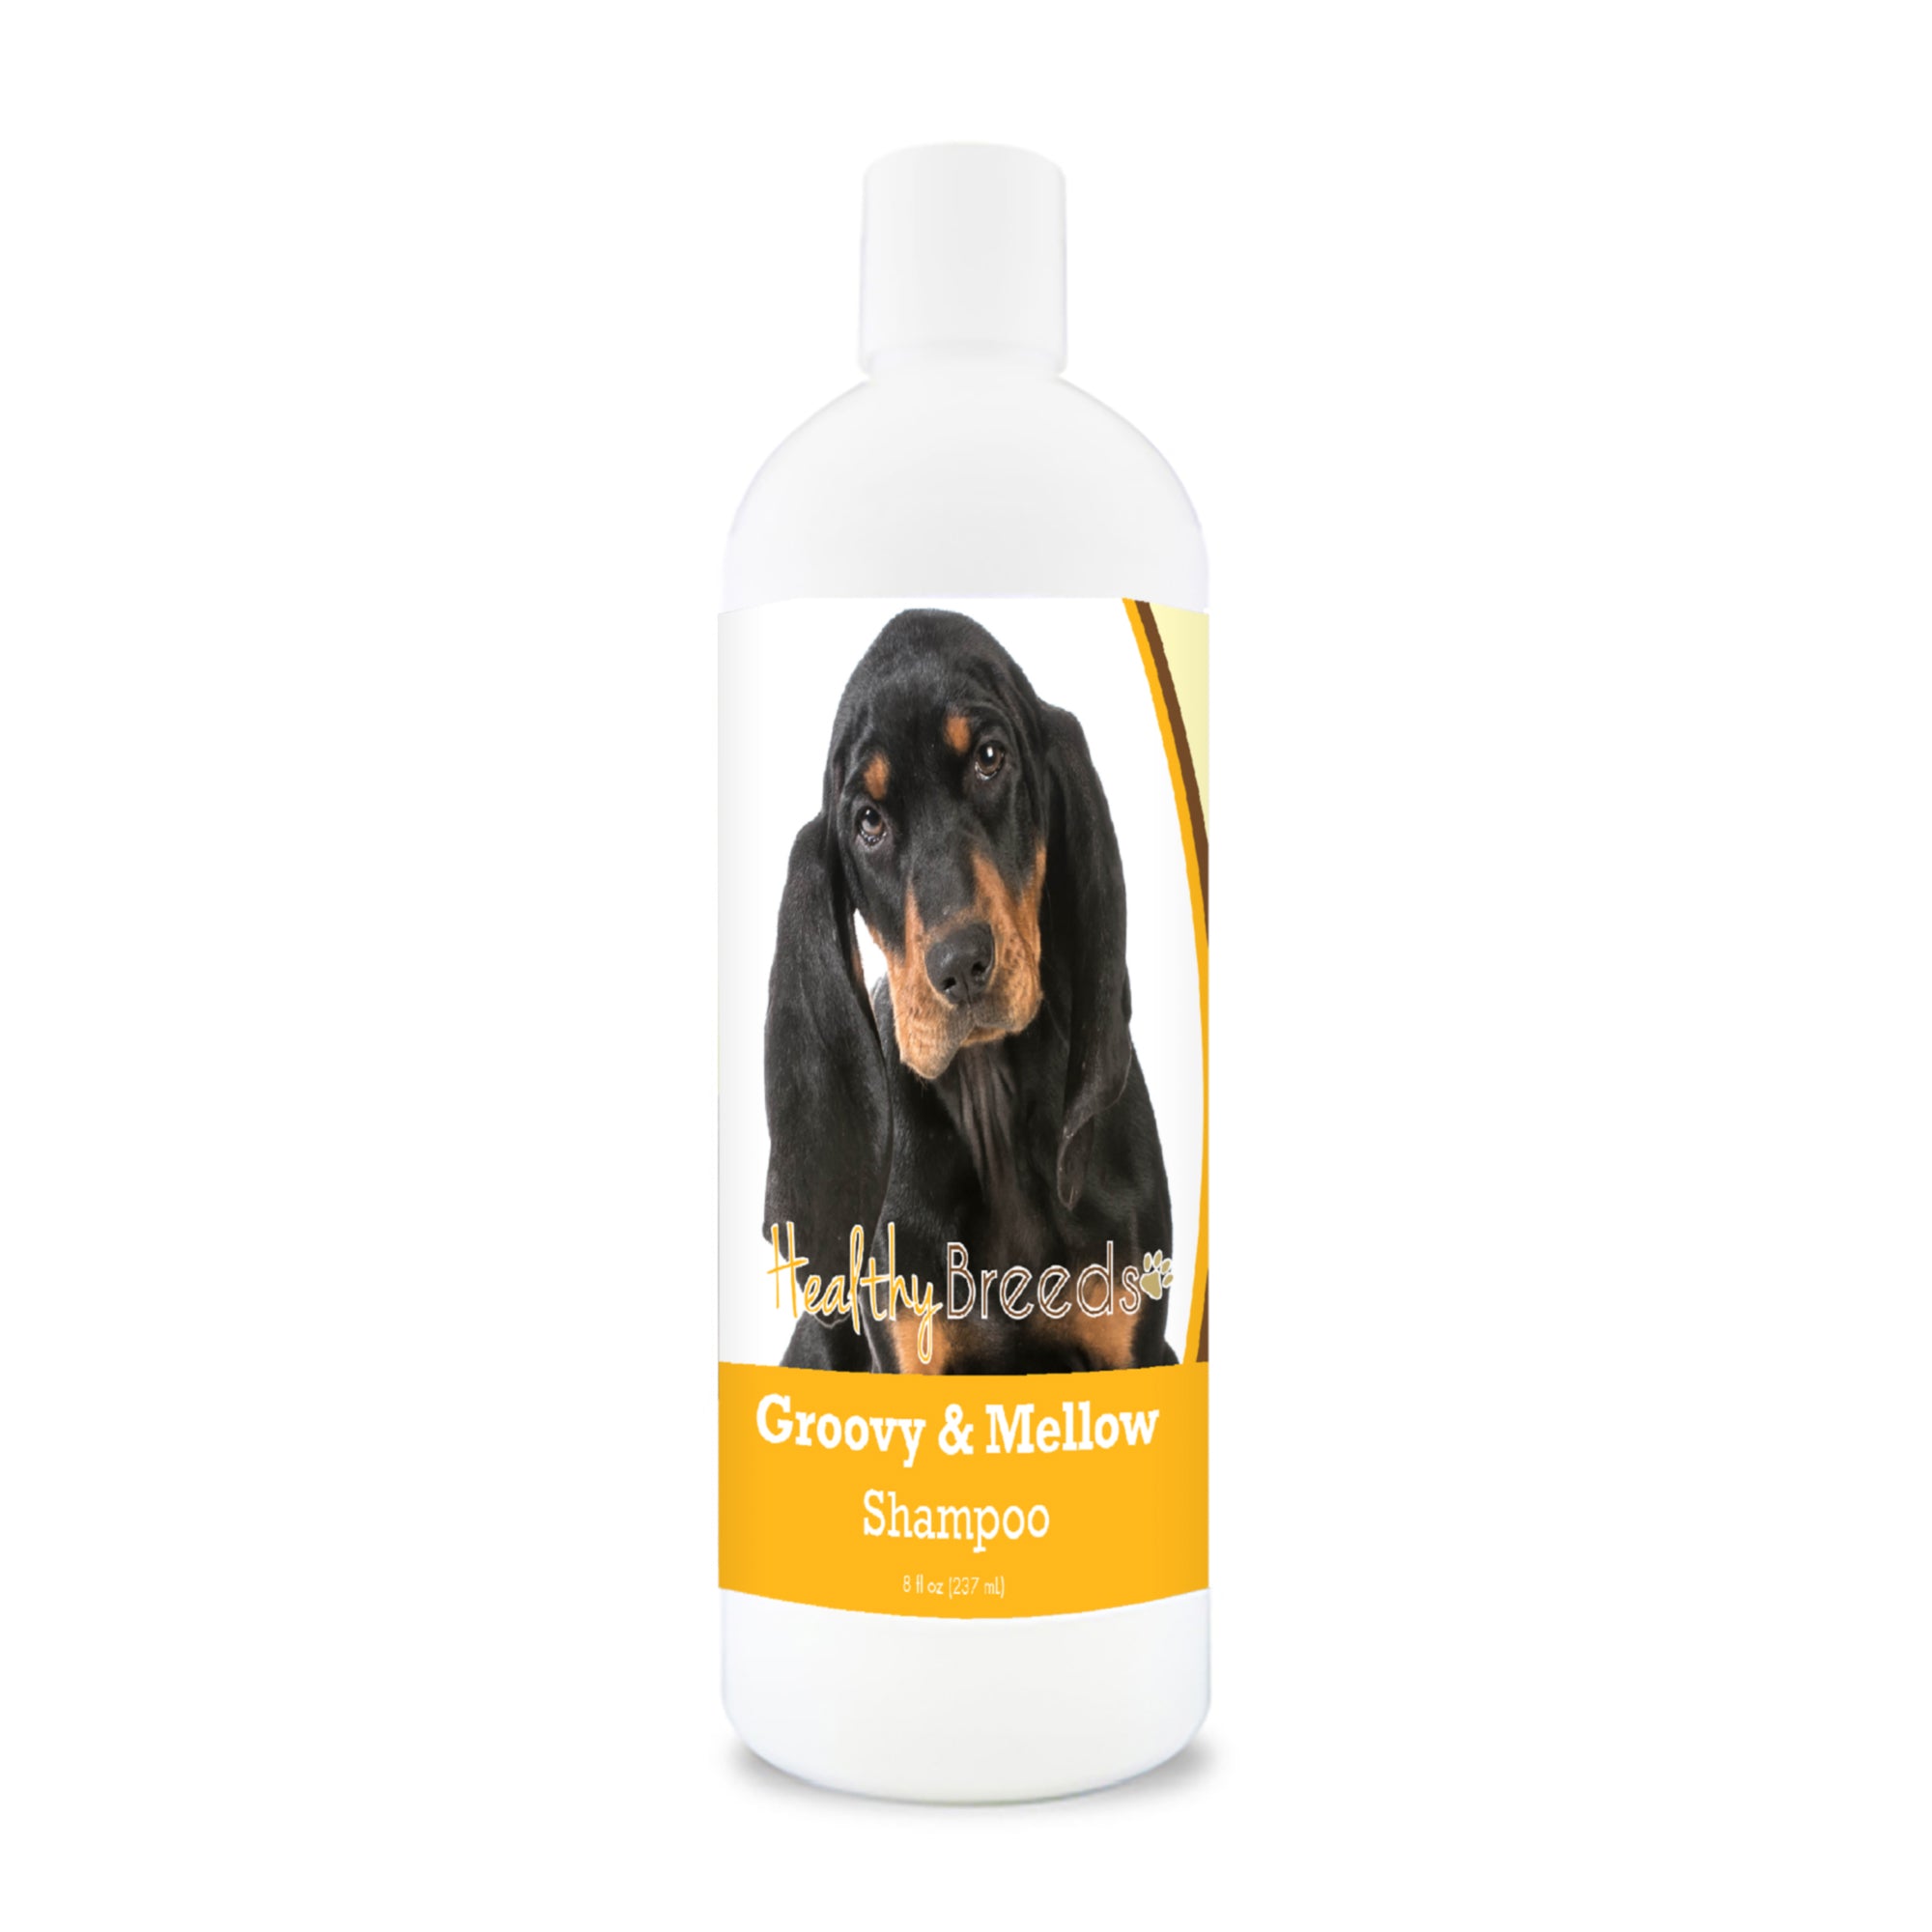 Black and Tan Coonhound Groovy & Mellow Shampoo 8 oz